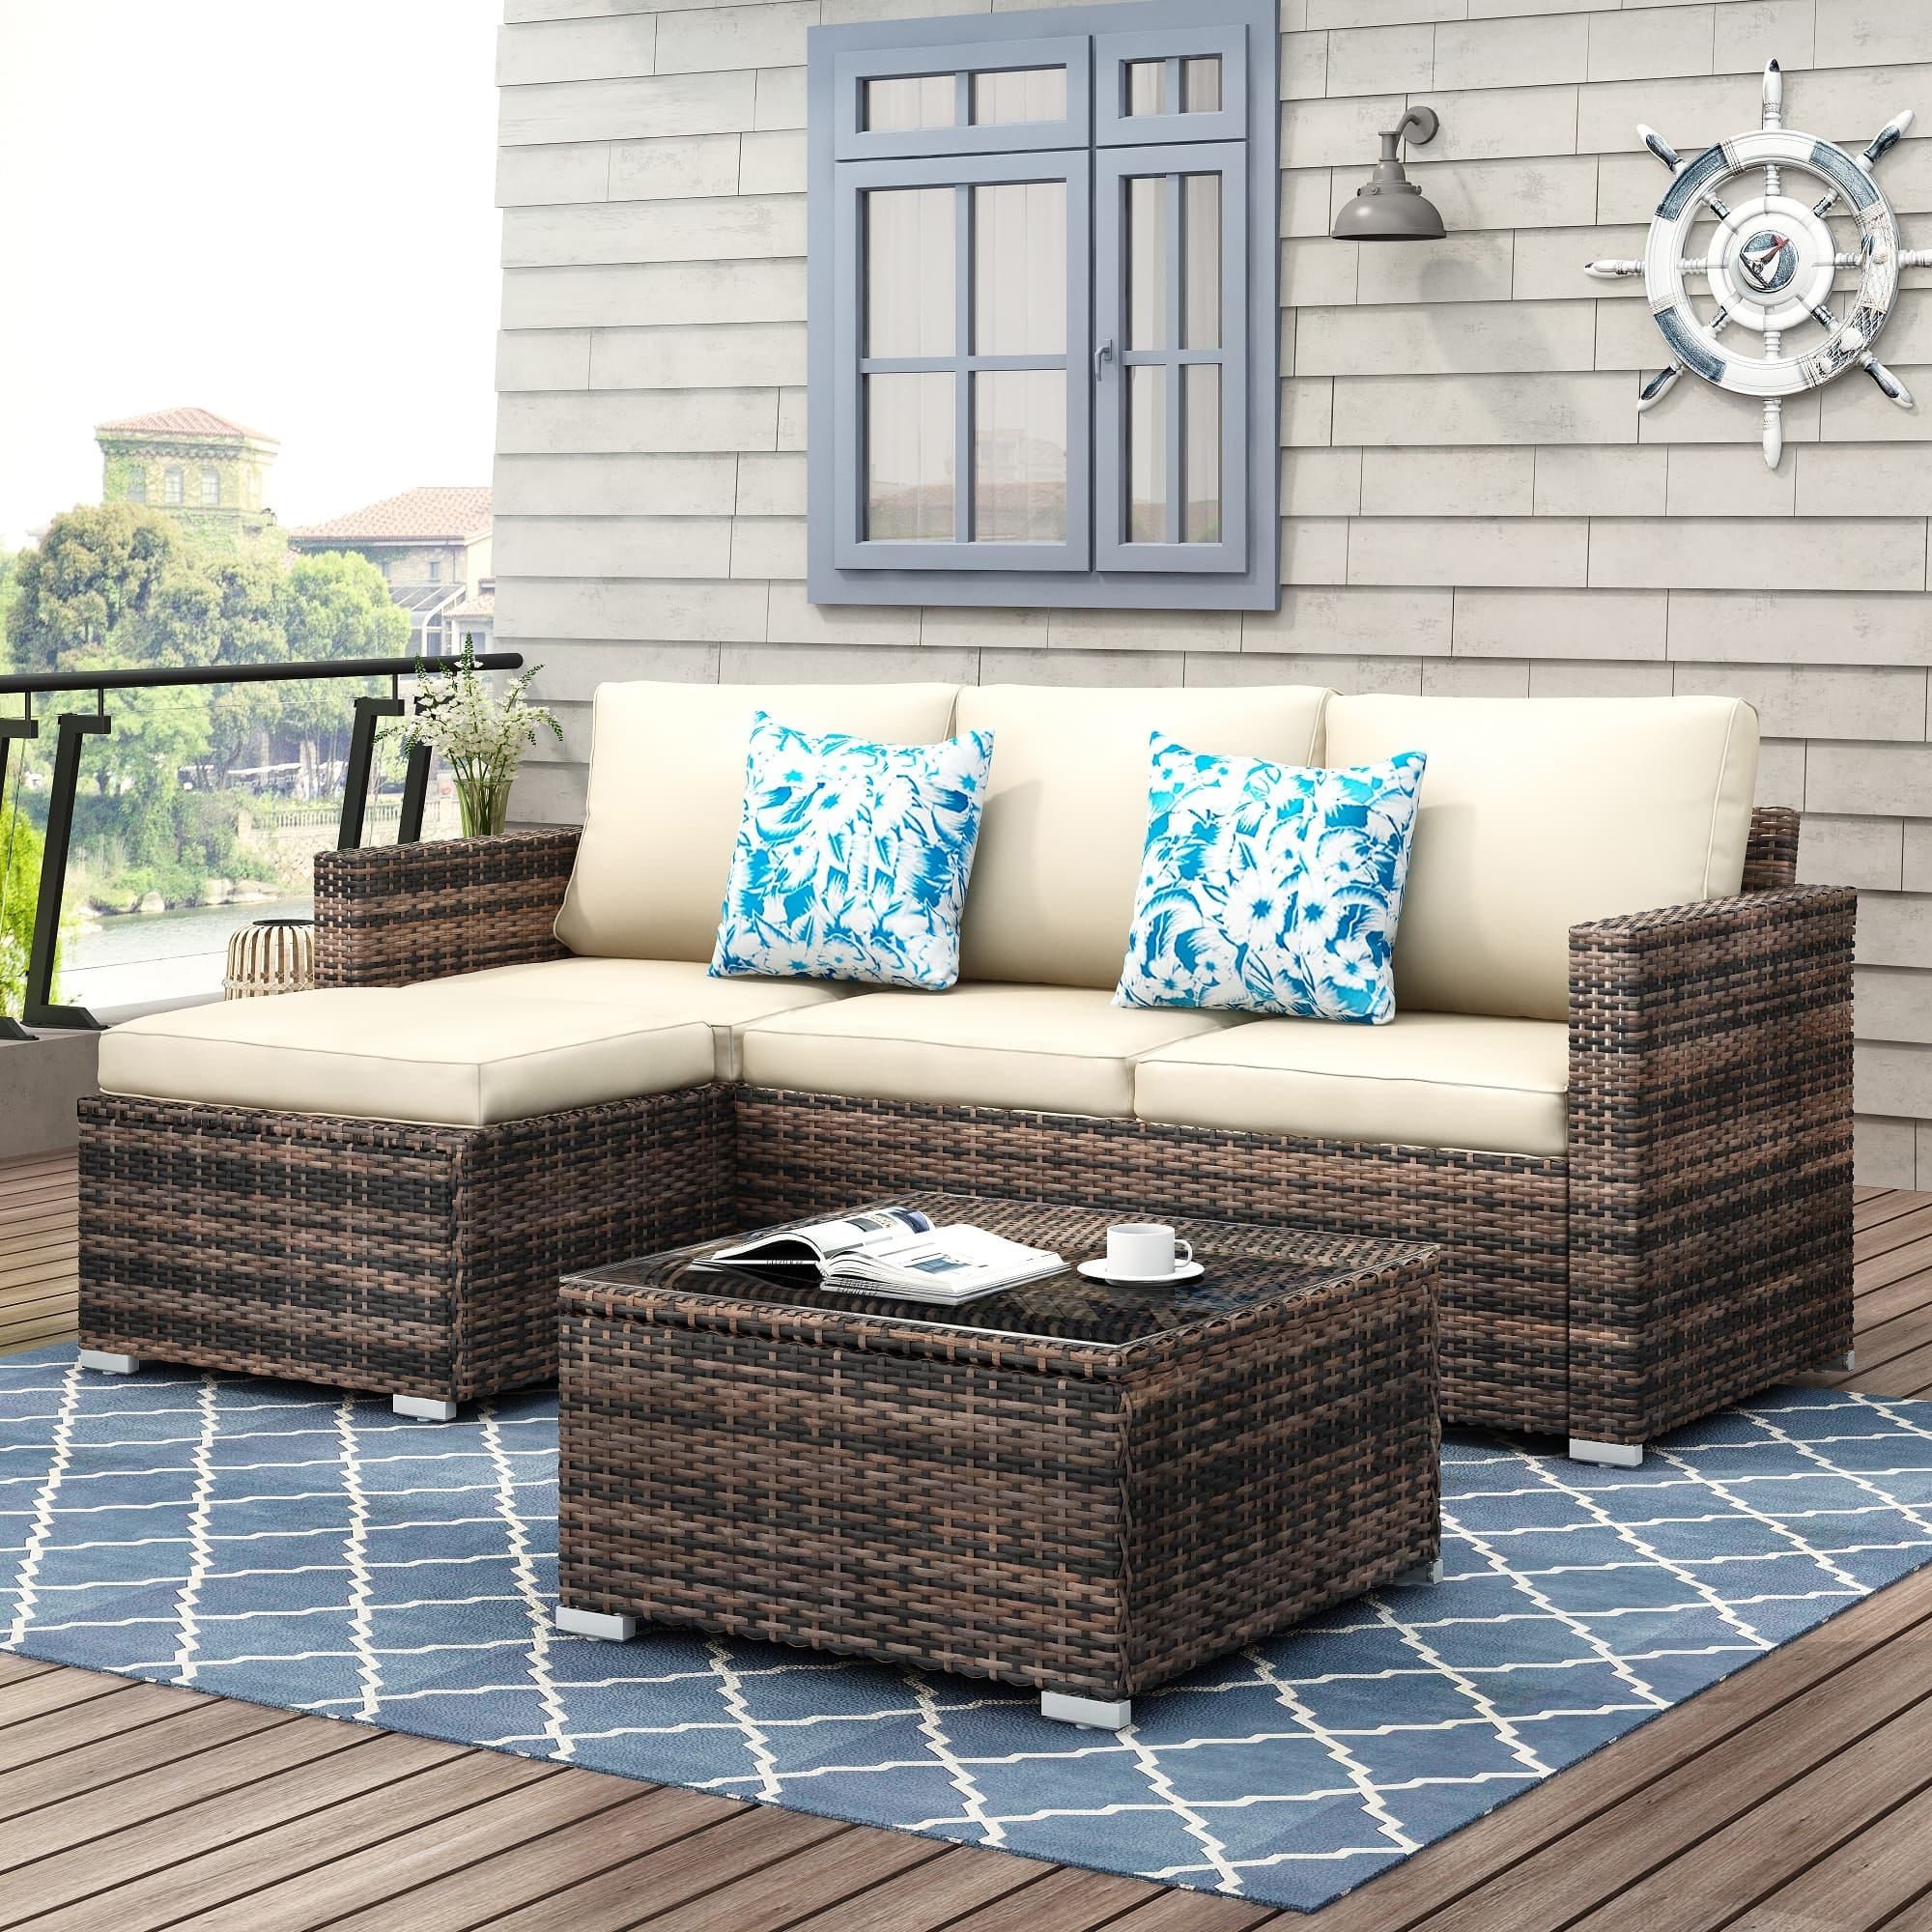 3 Piece Patio Furniture Sets Resin Wicker Outdoor Sectional Sofa Chat Set –  On Sale – – 31721010 Inside Outdoor Wicker 3 Piece Set (View 15 of 15)